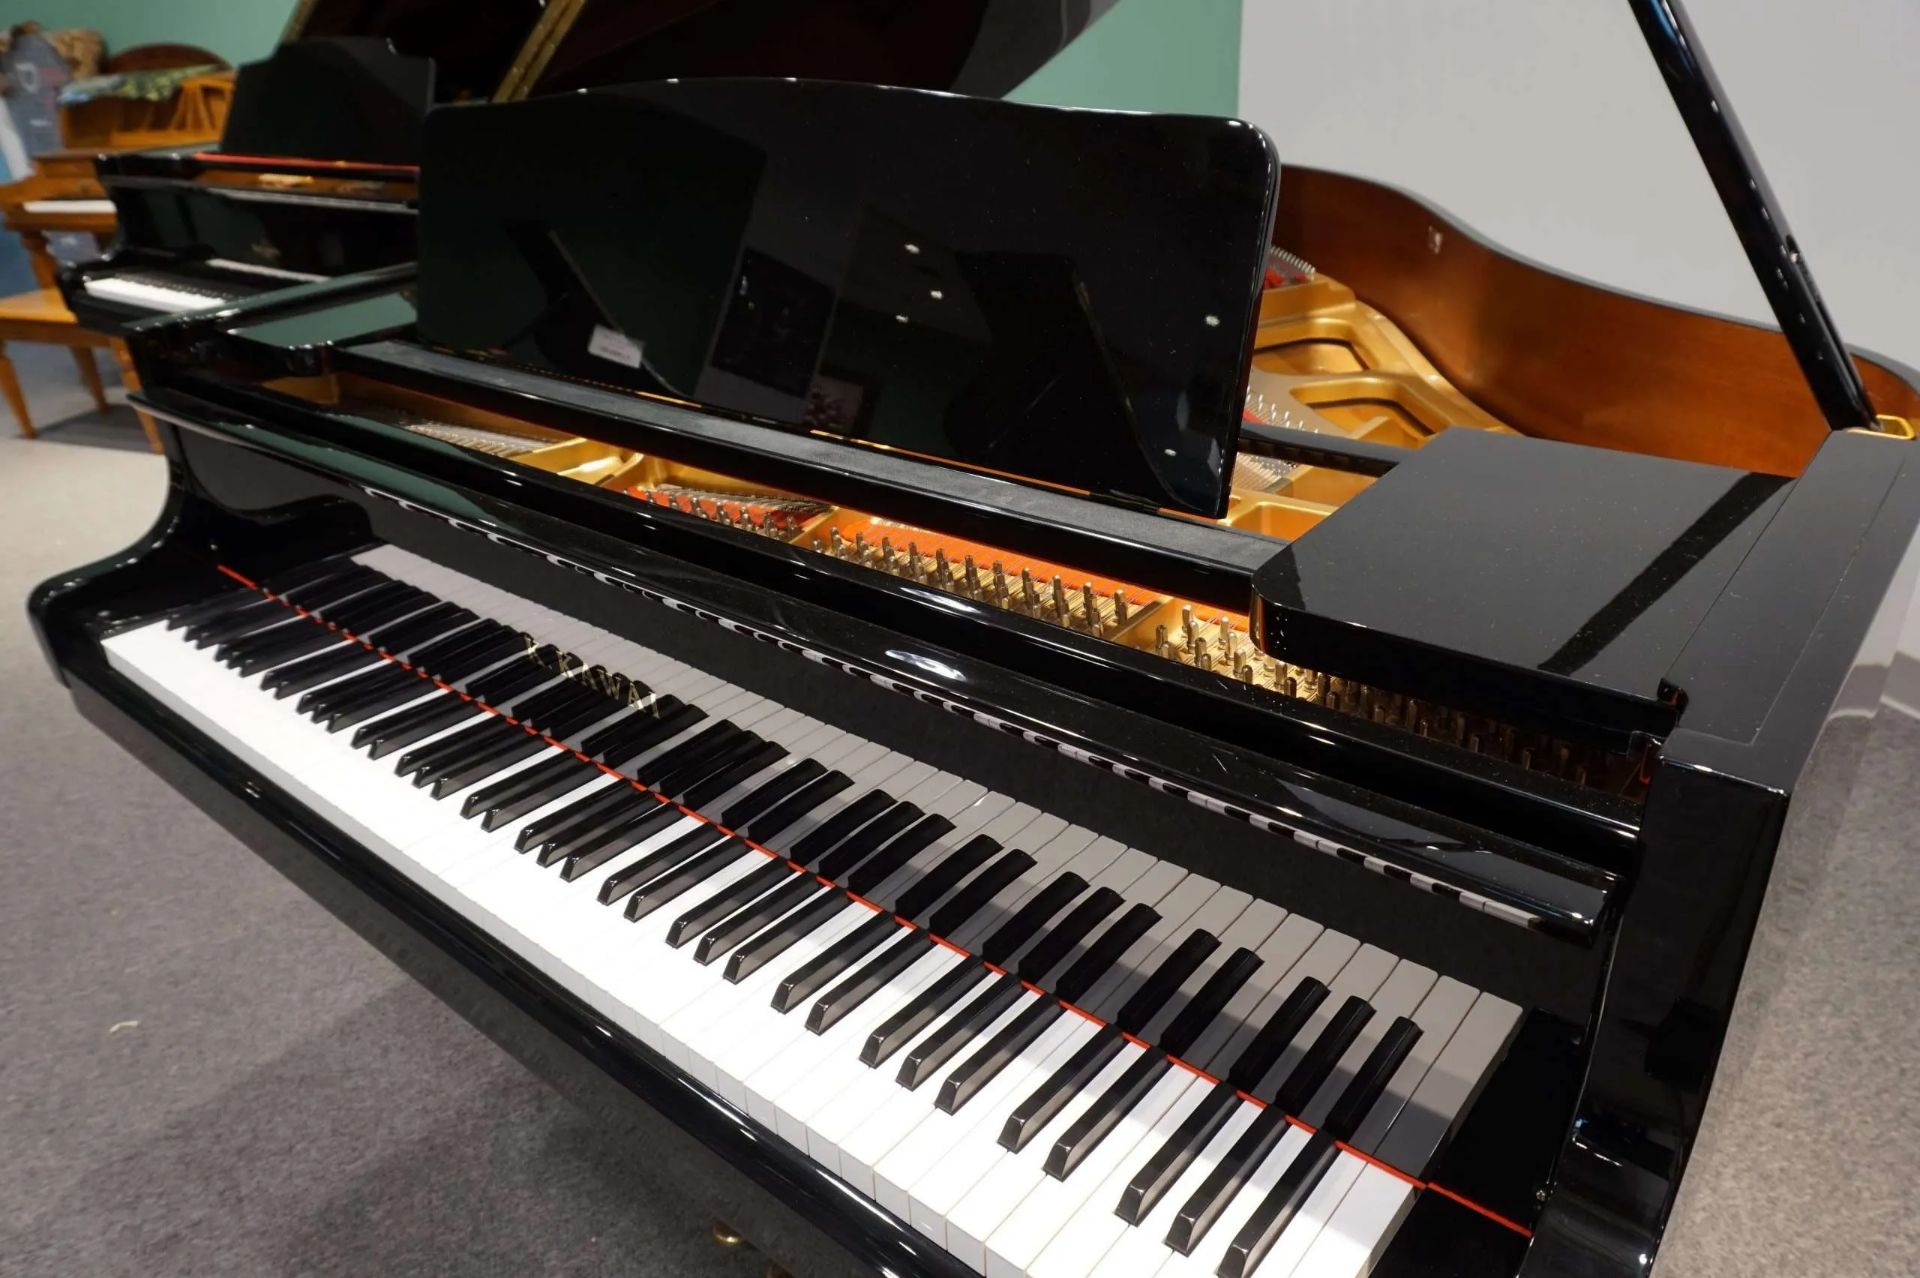 Kawai GM-10K Baby Grand Piano With Resonant Tone And Classic Good Looks, The GM-10K Offers - Image 3 of 3